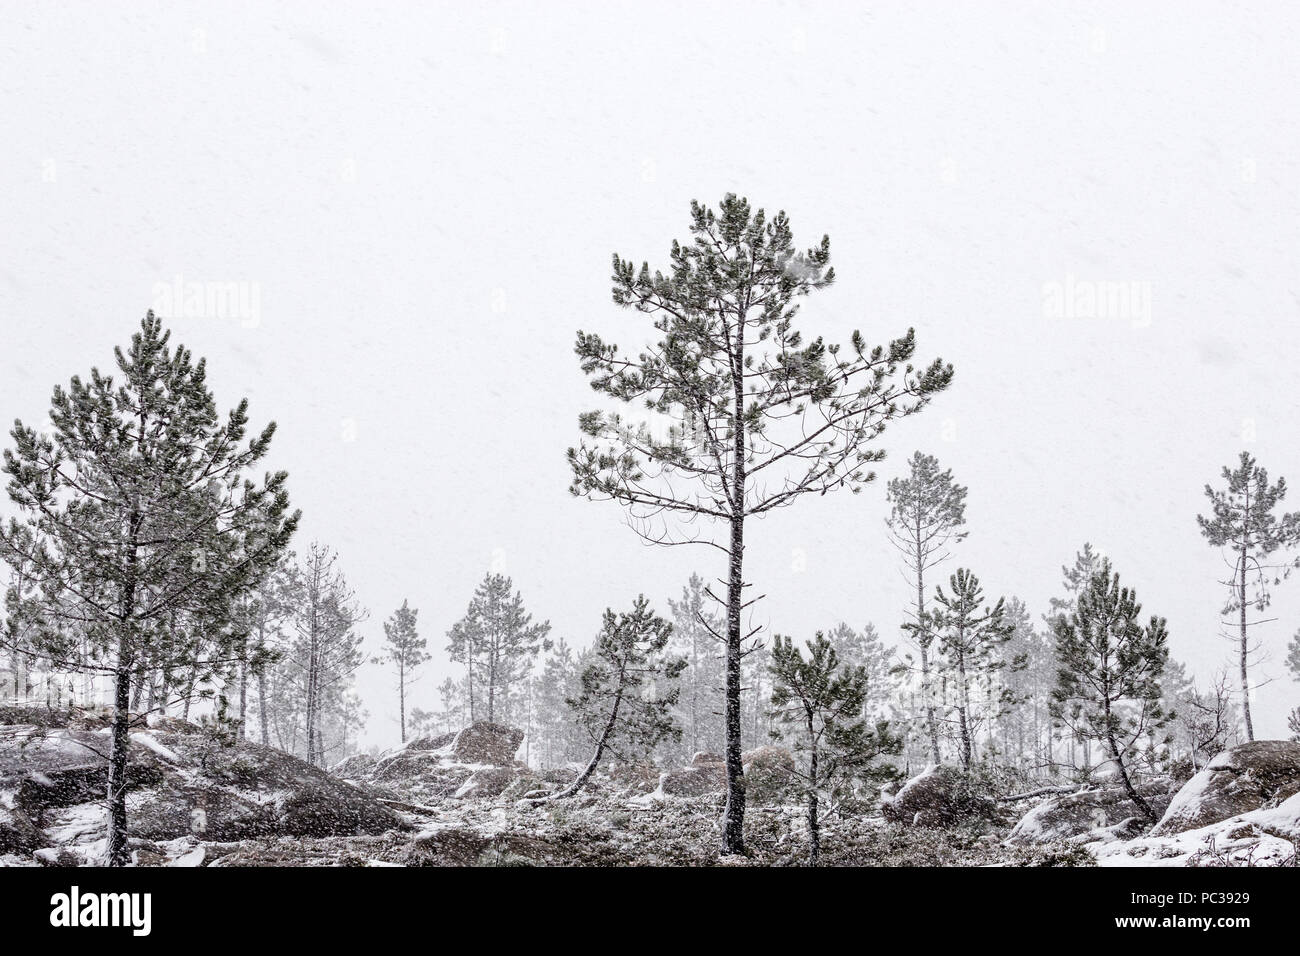 scots pine trees in blowing snow, Lamas area, mountain tops, Parque Nacional Peneda - Geres, Portugal Stock Photo